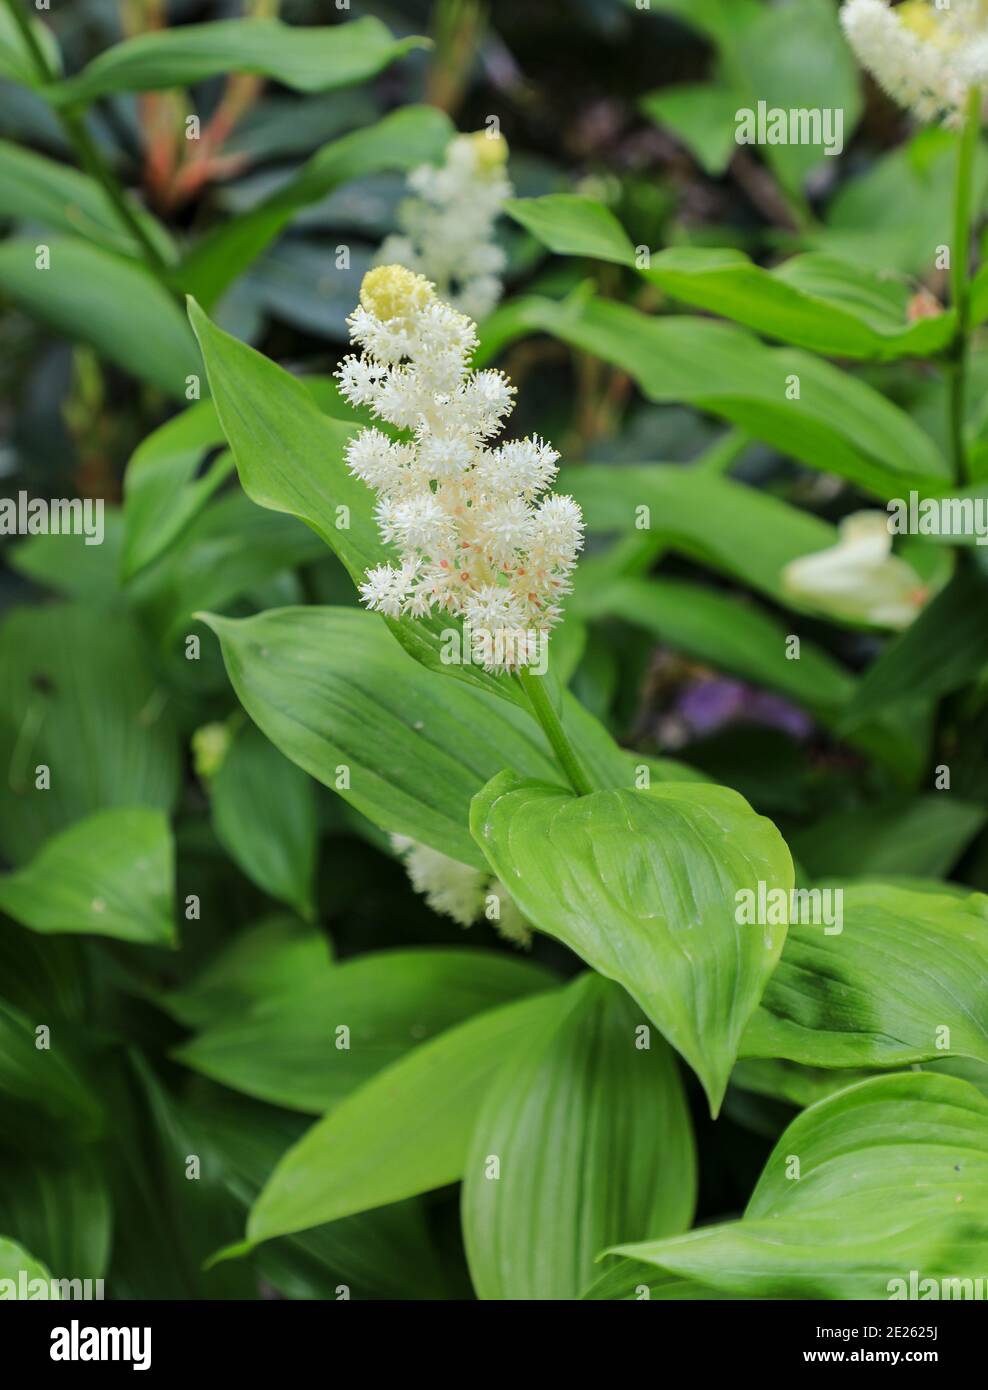 The white flowers of False Solomon's Seal (Maianthemum racemosum), Bodnant Gardens, Tal-y-Cafn, Conwy, Wales, UK Stock Photo